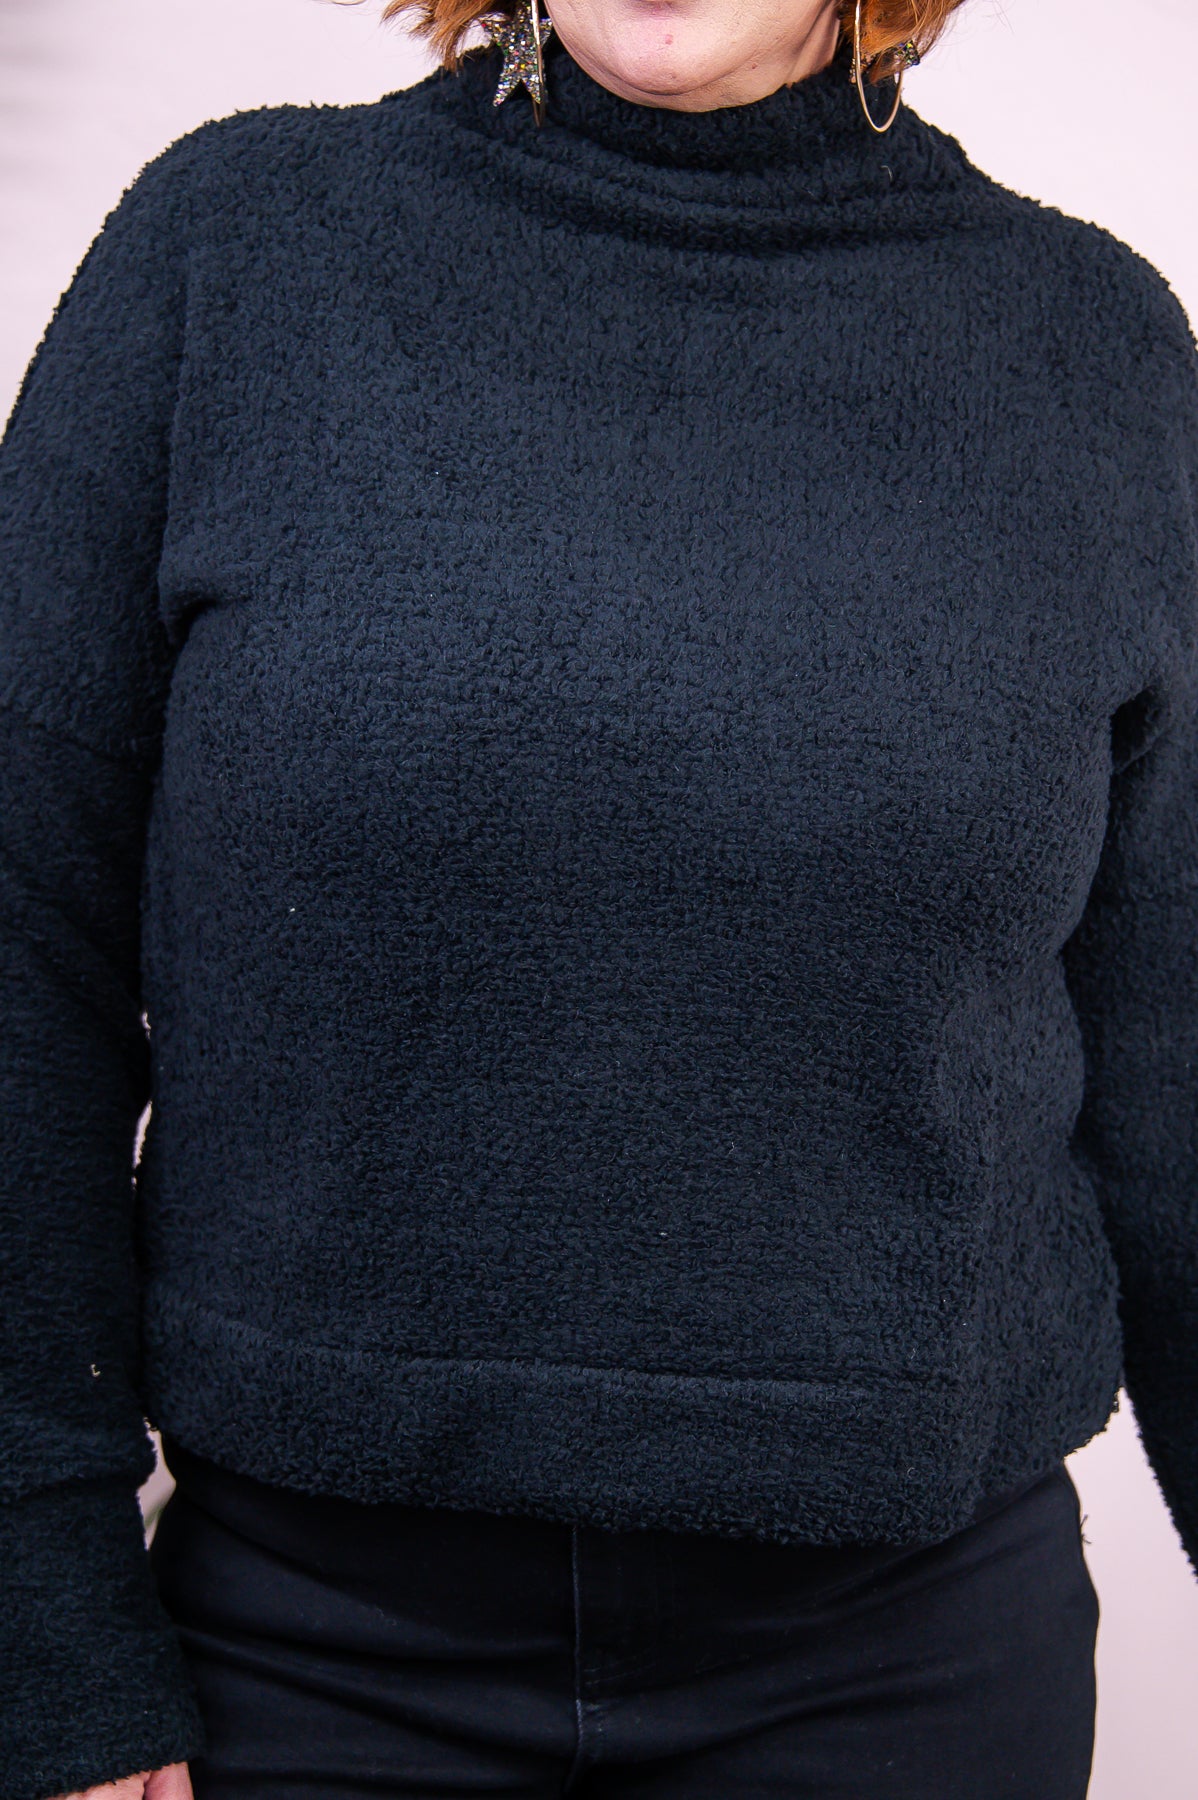 Embrace The Winter Chill Black Solid Sweater Top - T8781BK